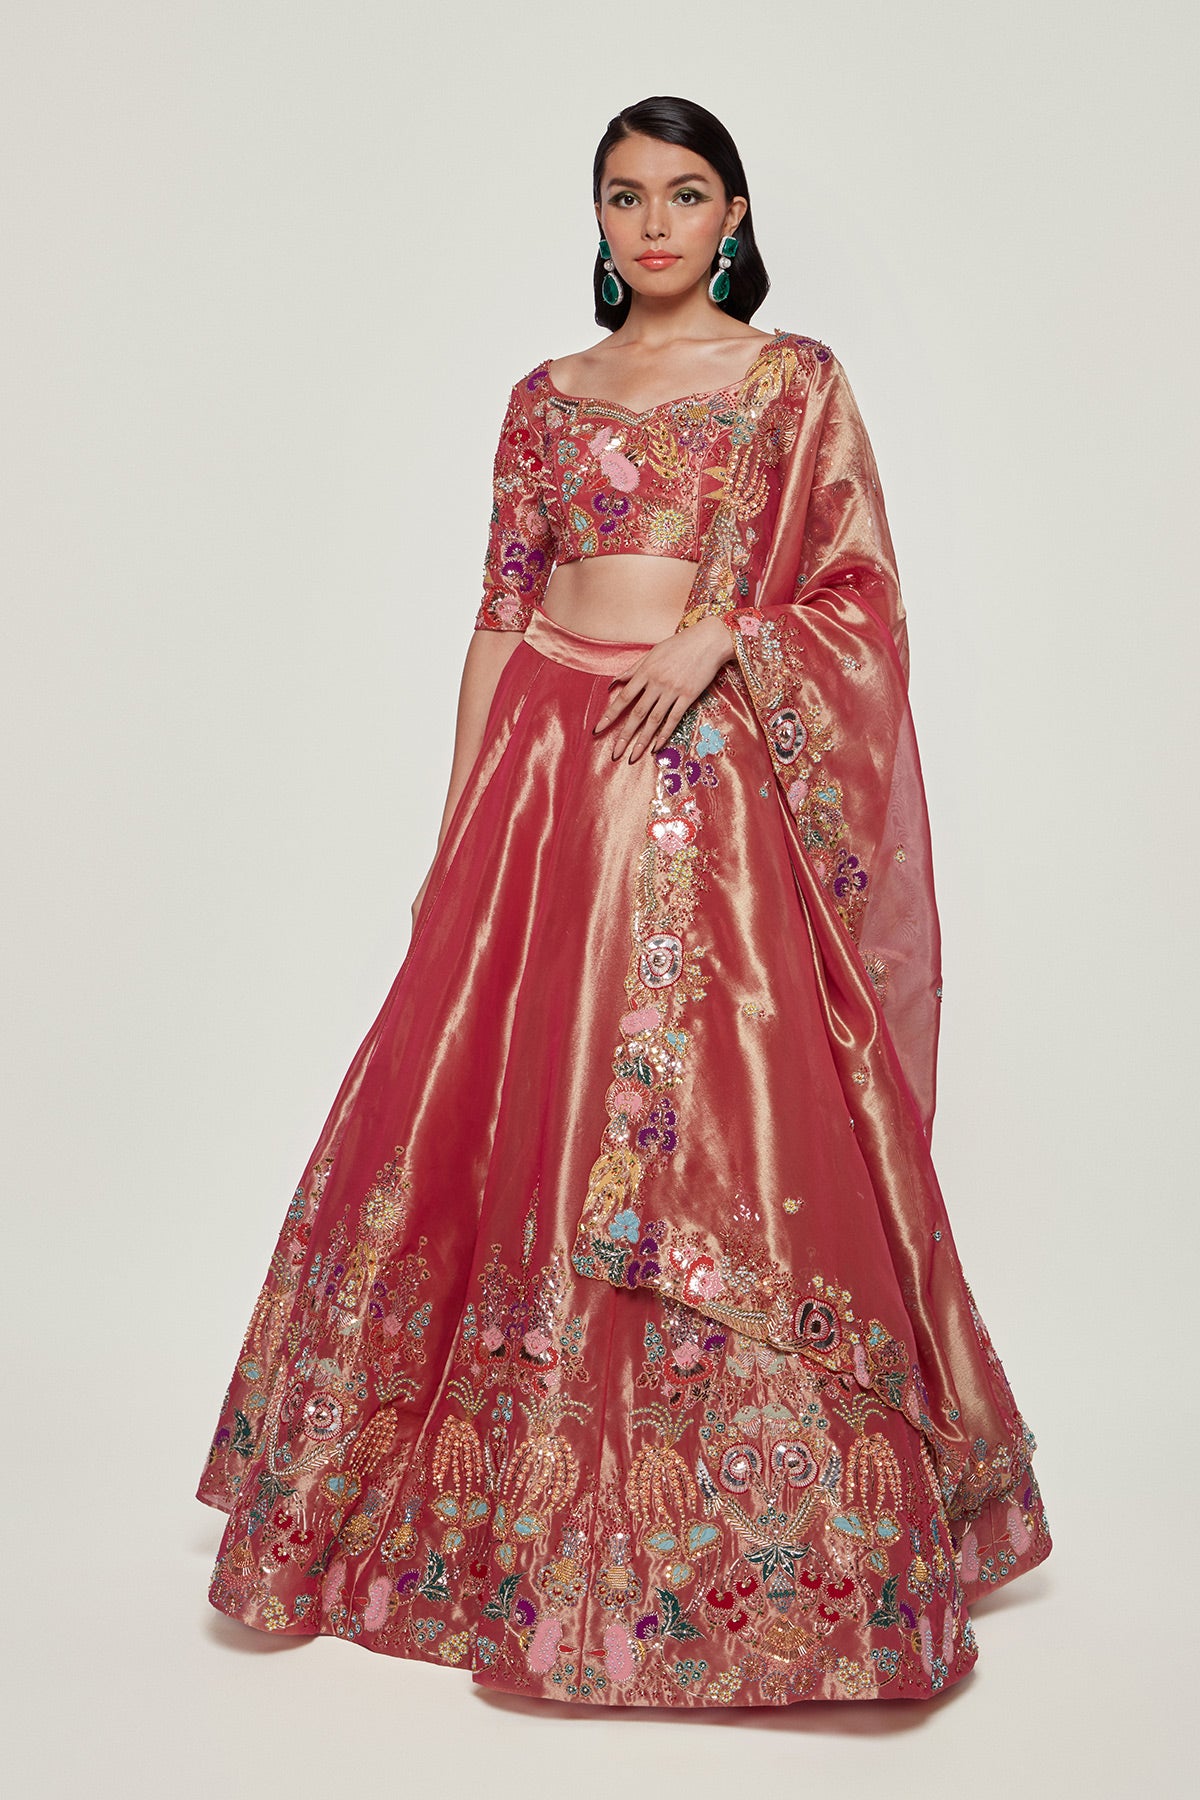 Magenta Pink Paper Dolls Tissue Appliquéd And Embellished Lehenga With Blouse And Cutwork Tissue Dupatta